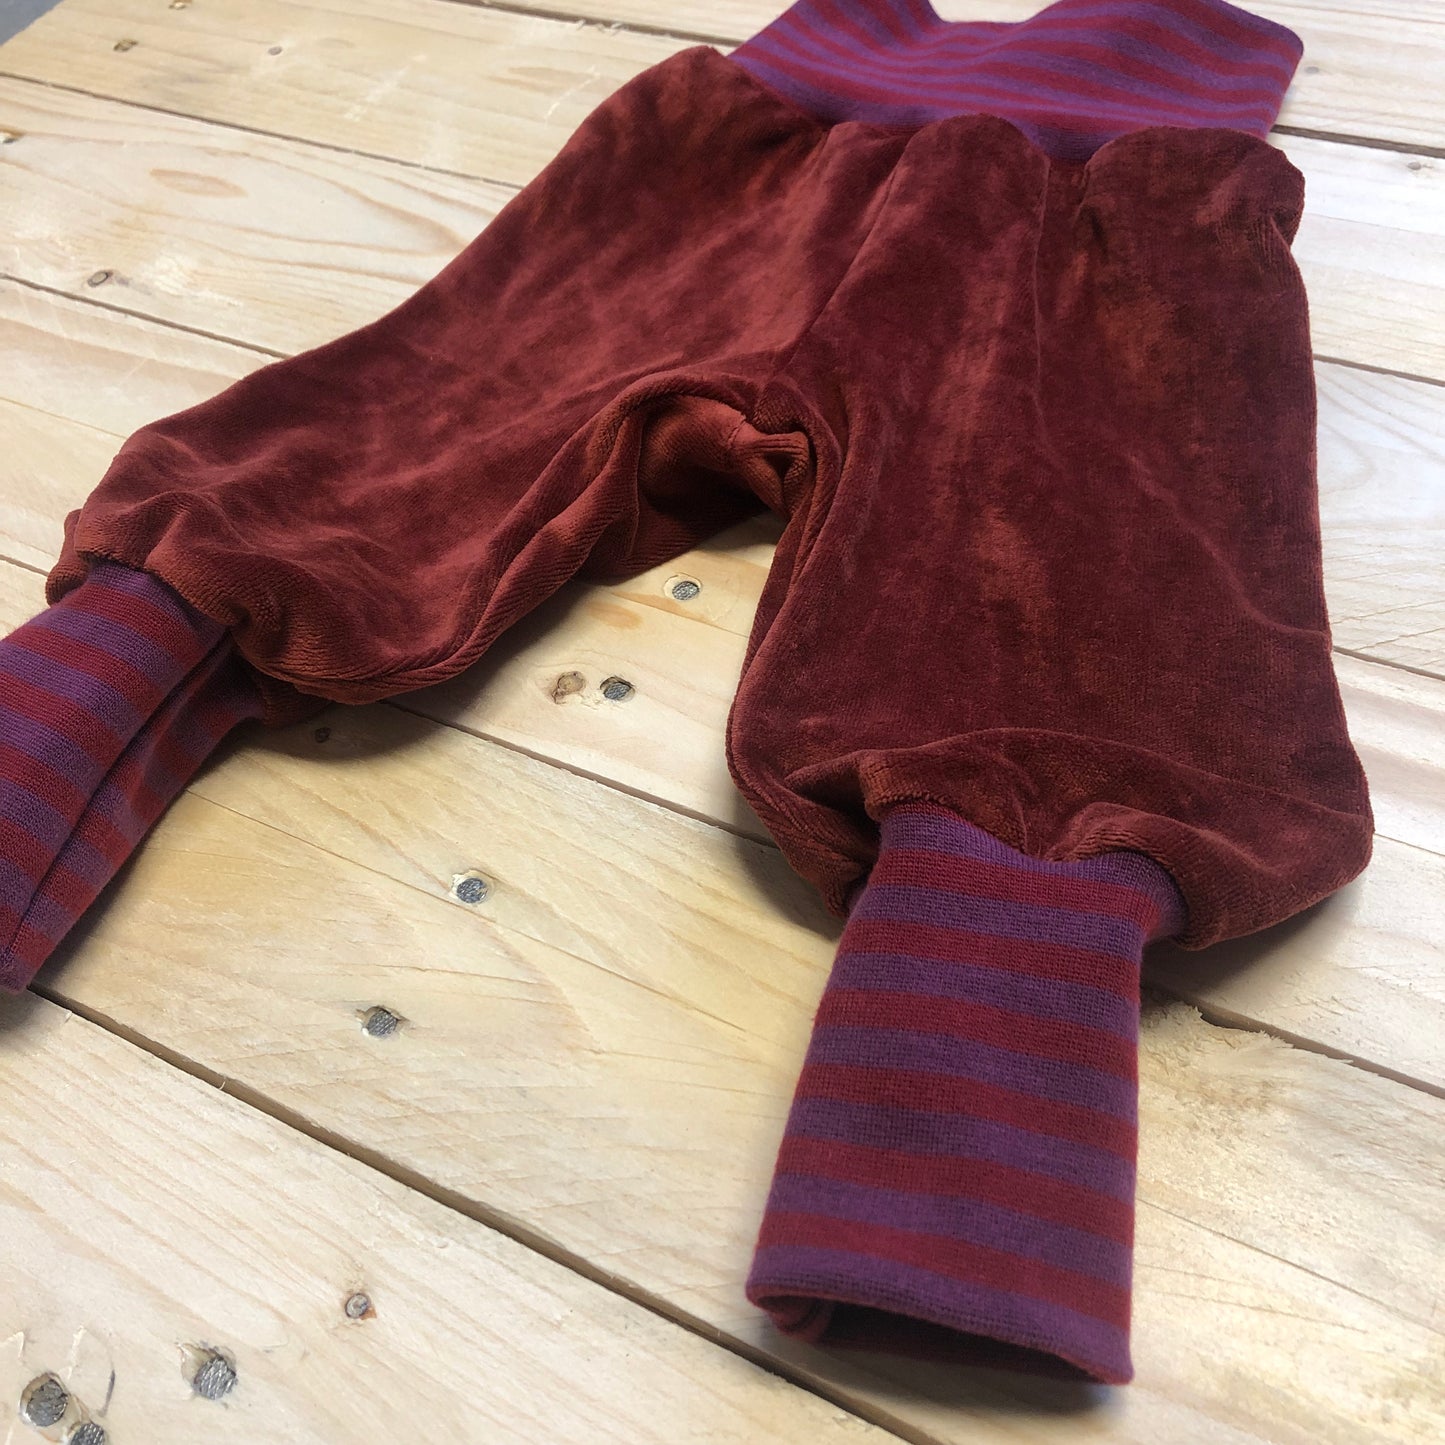 Baby Nickihose in rost / rot-lilagestreift 56/62, 68/74